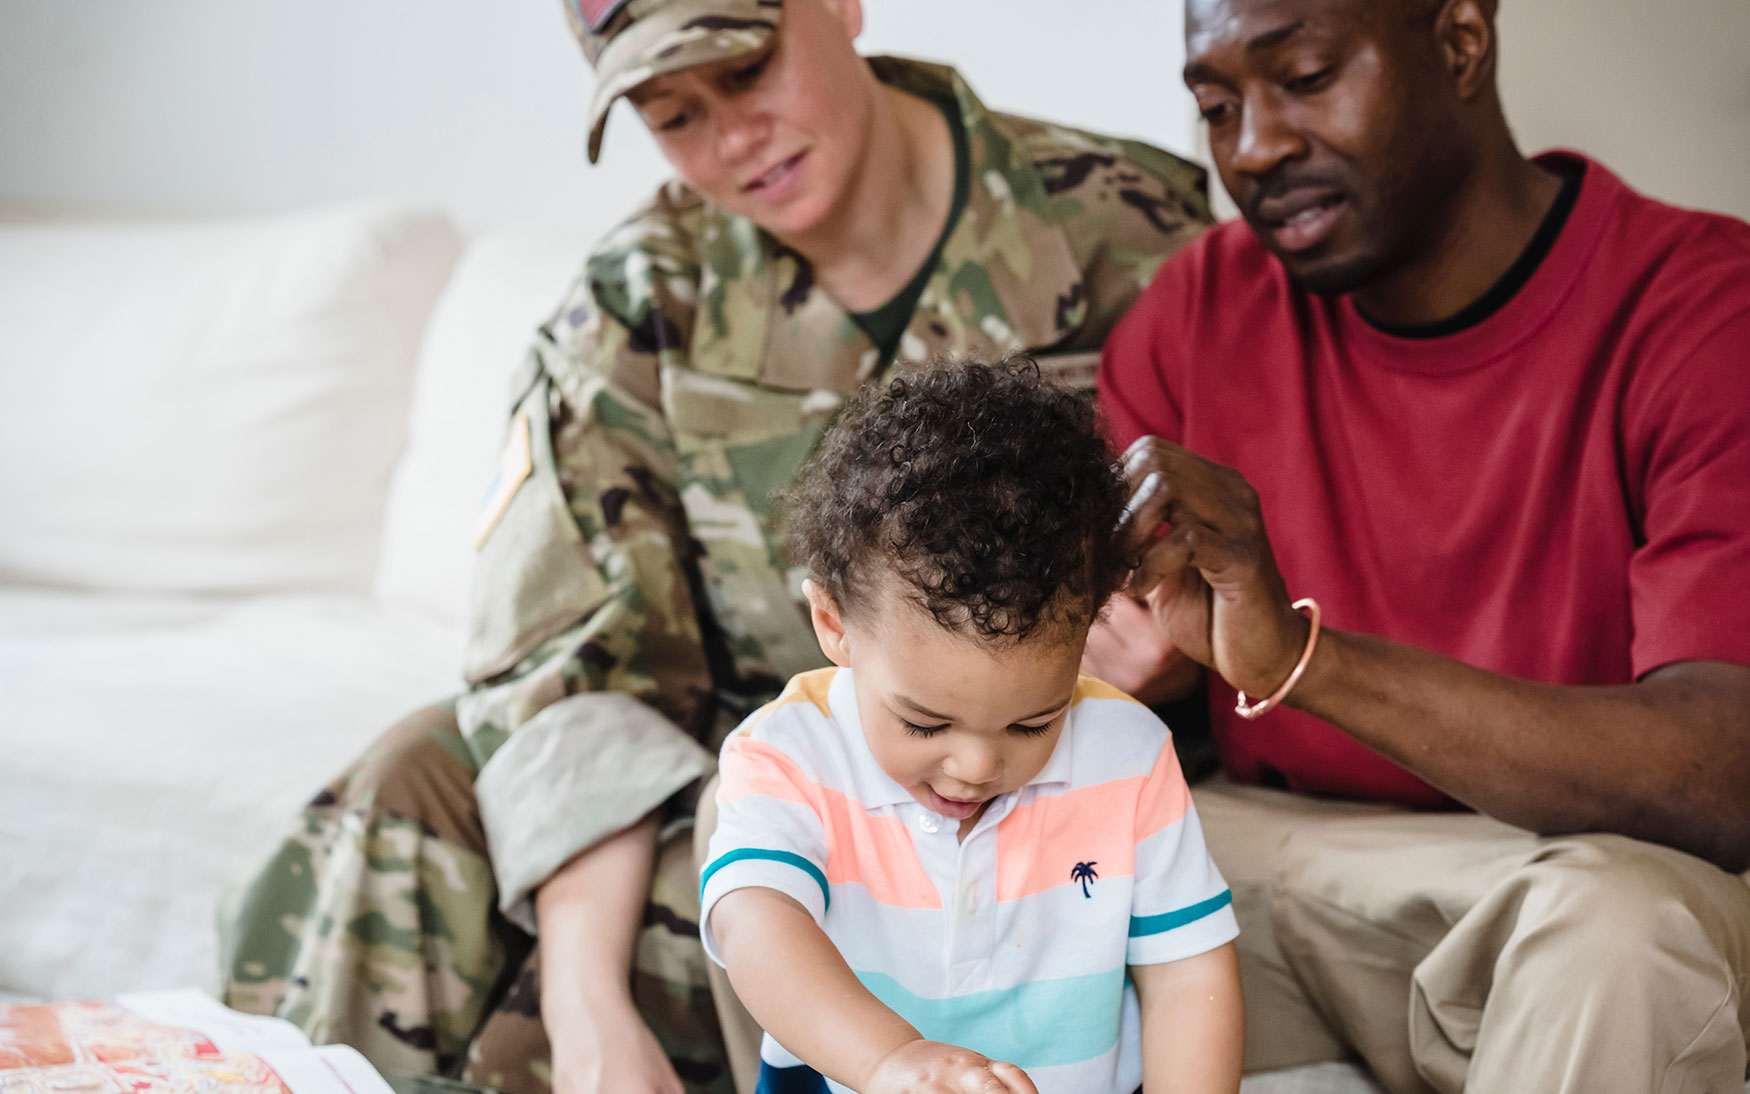 one parent in military uniform and one without sit with child